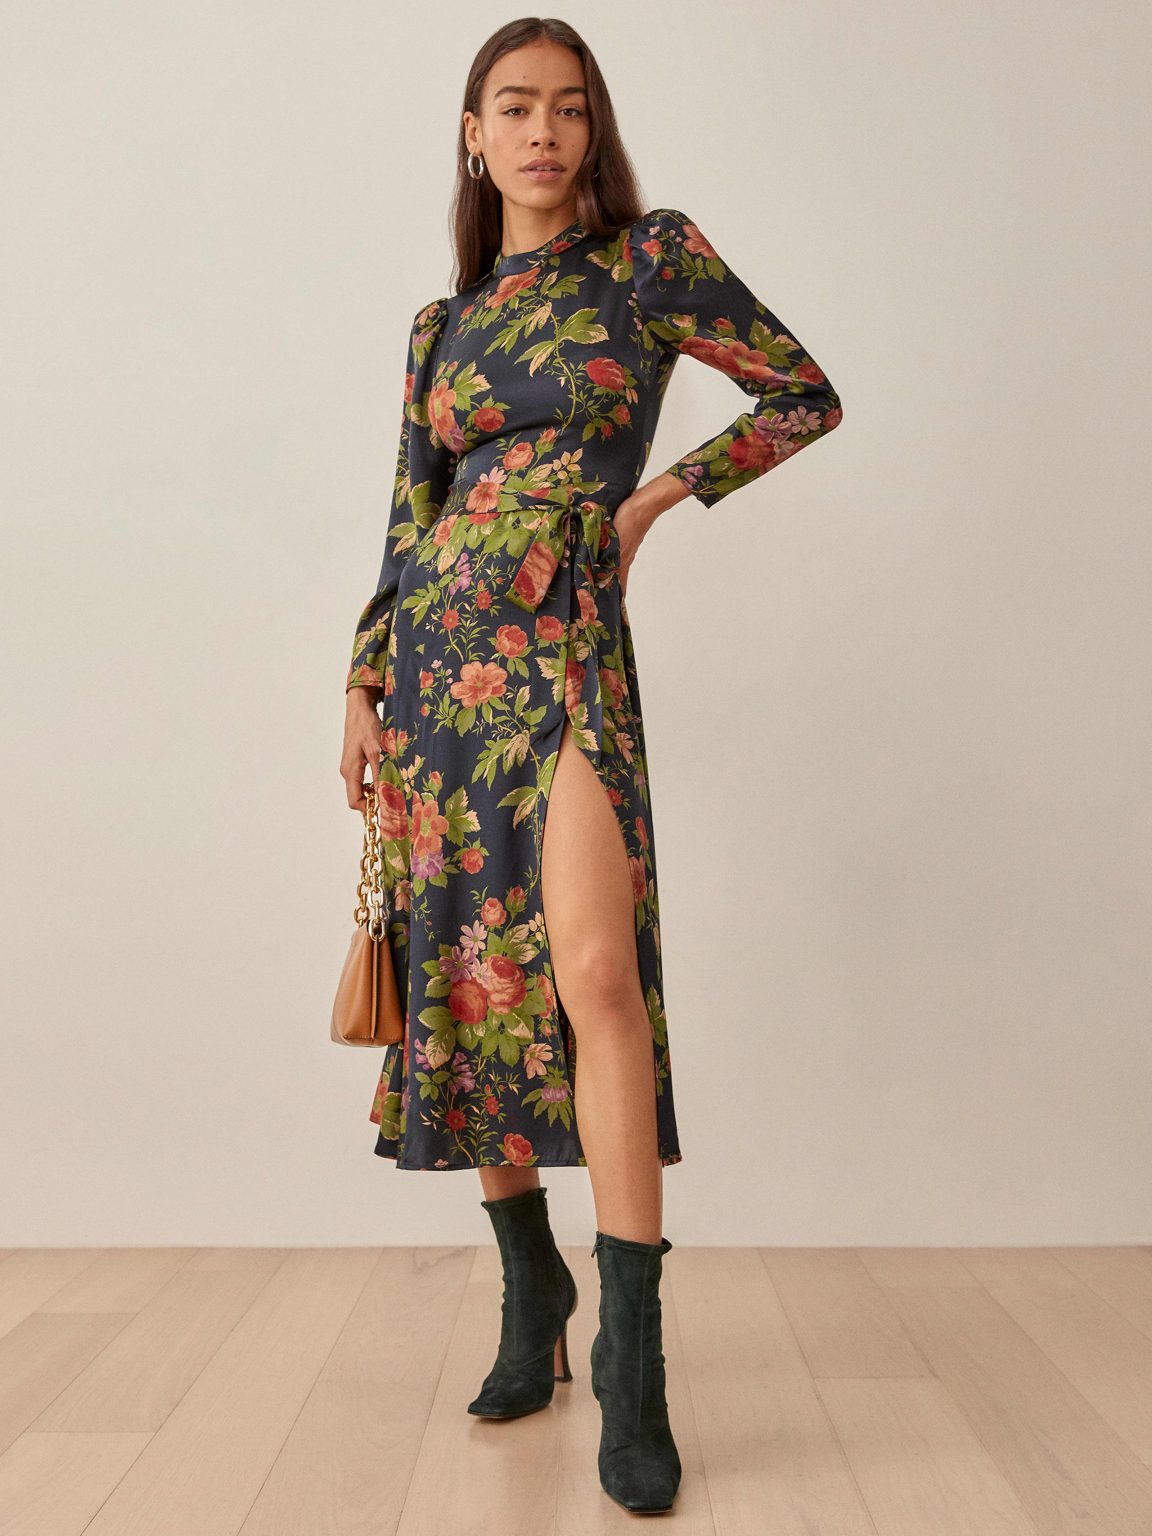 50 Winter Wedding Guest Dresses For 2022 | For Better For Worse